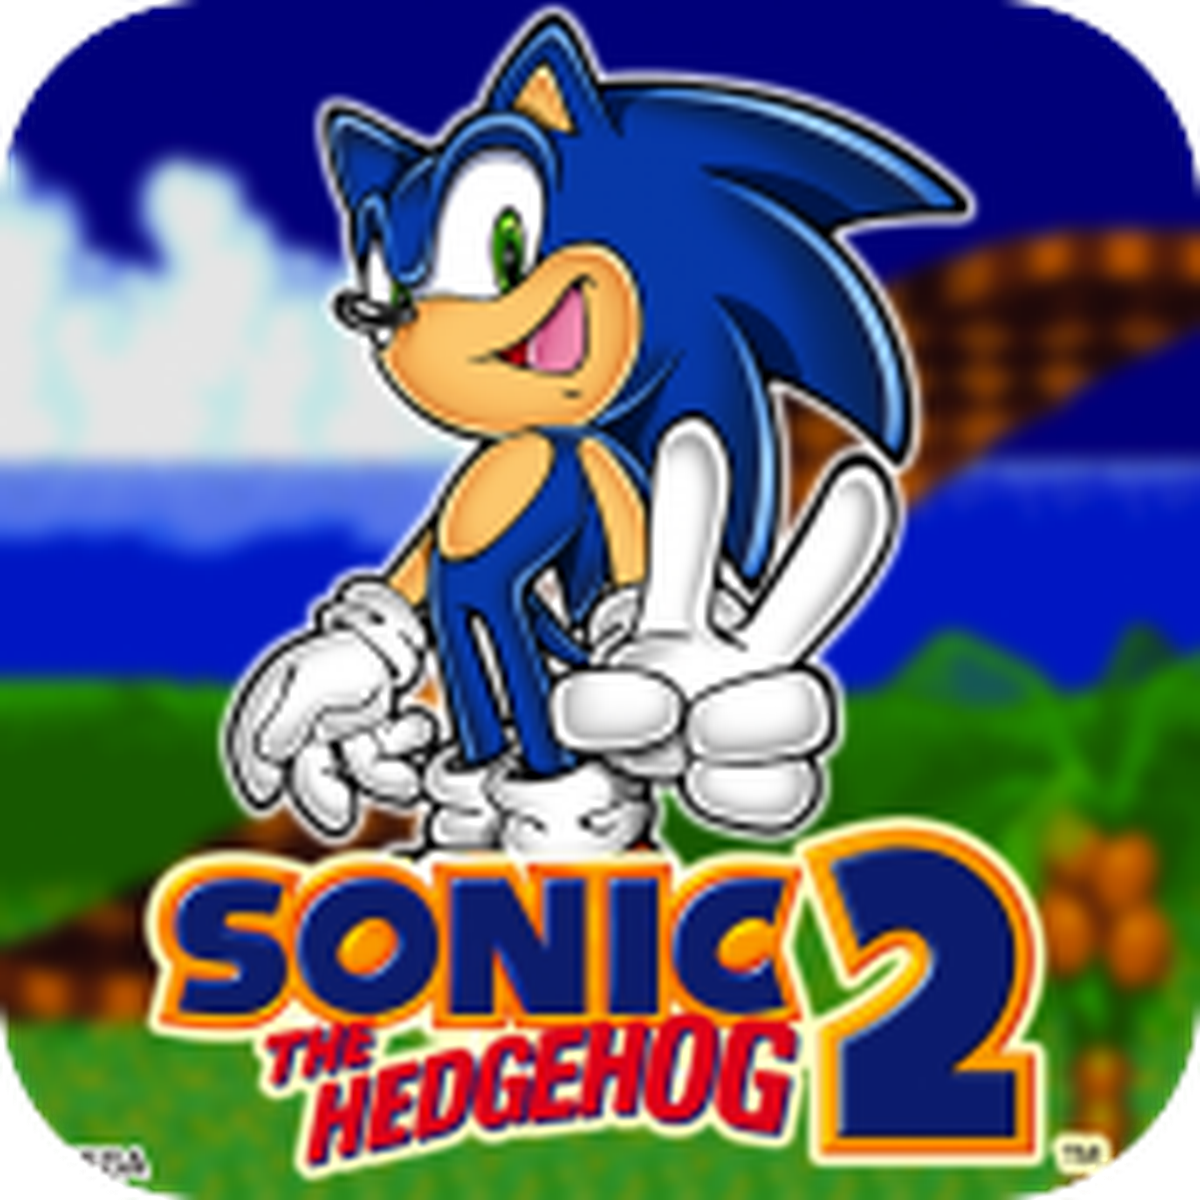 Sonic The Hedgehog 2 Classic on the App Store